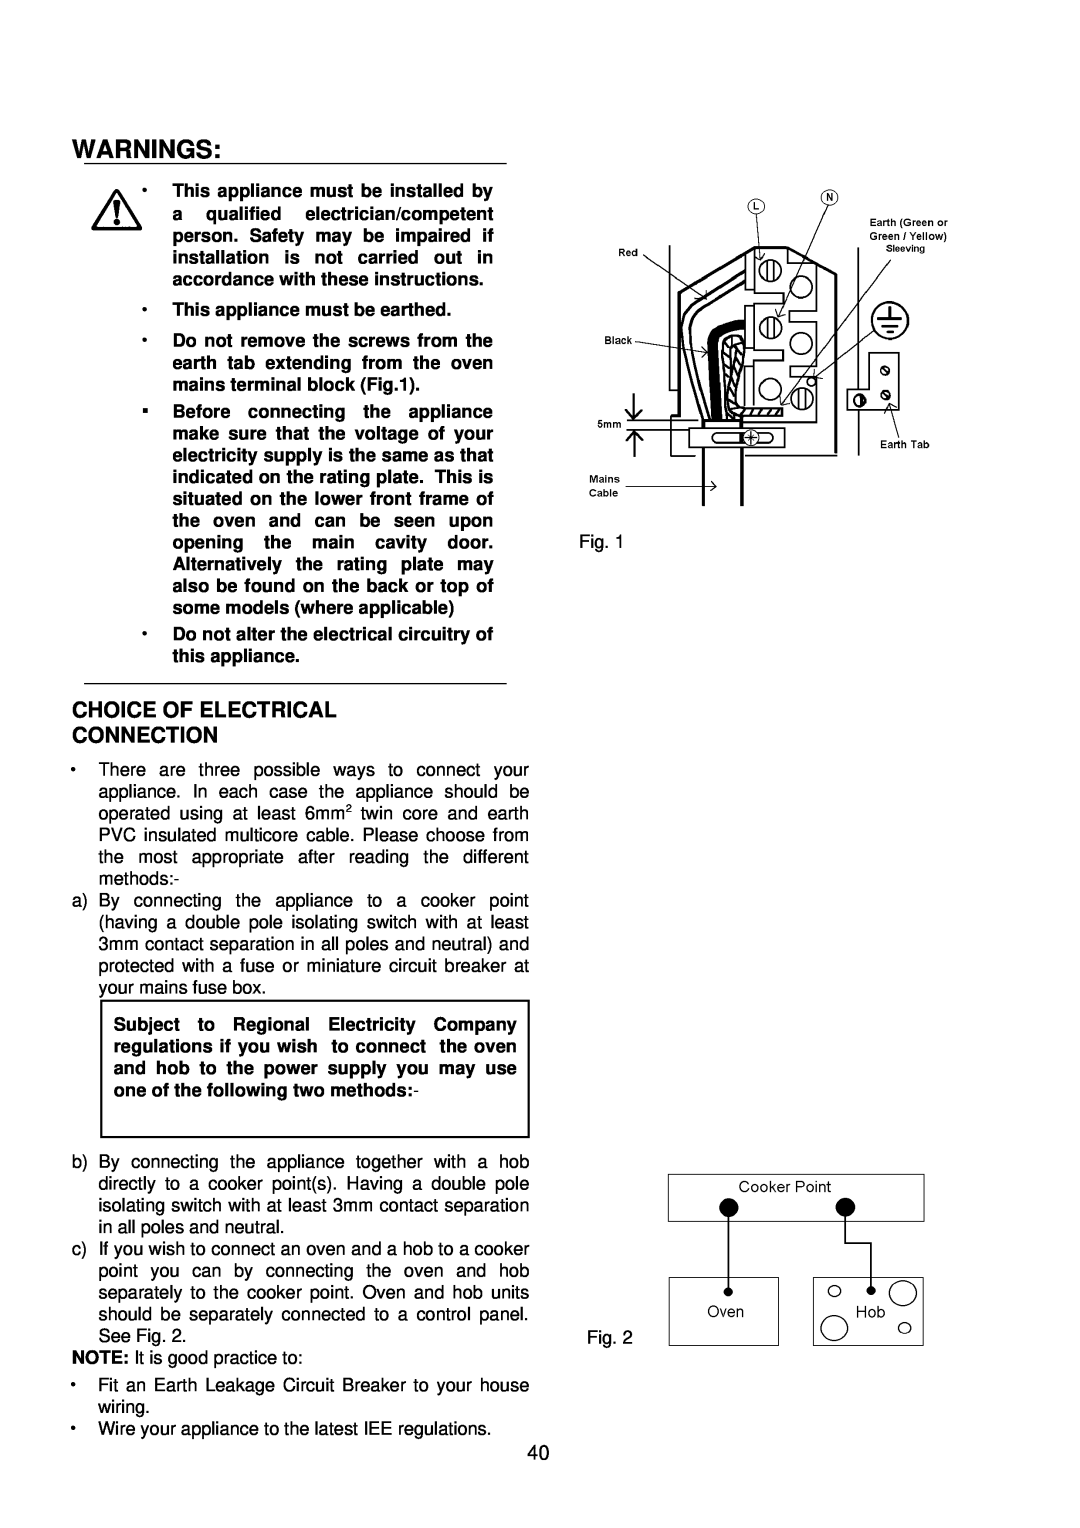 Electrolux D4100-1 operating instructions Warnings, Choice Of Electrical Connection, This appliance must be earthed 